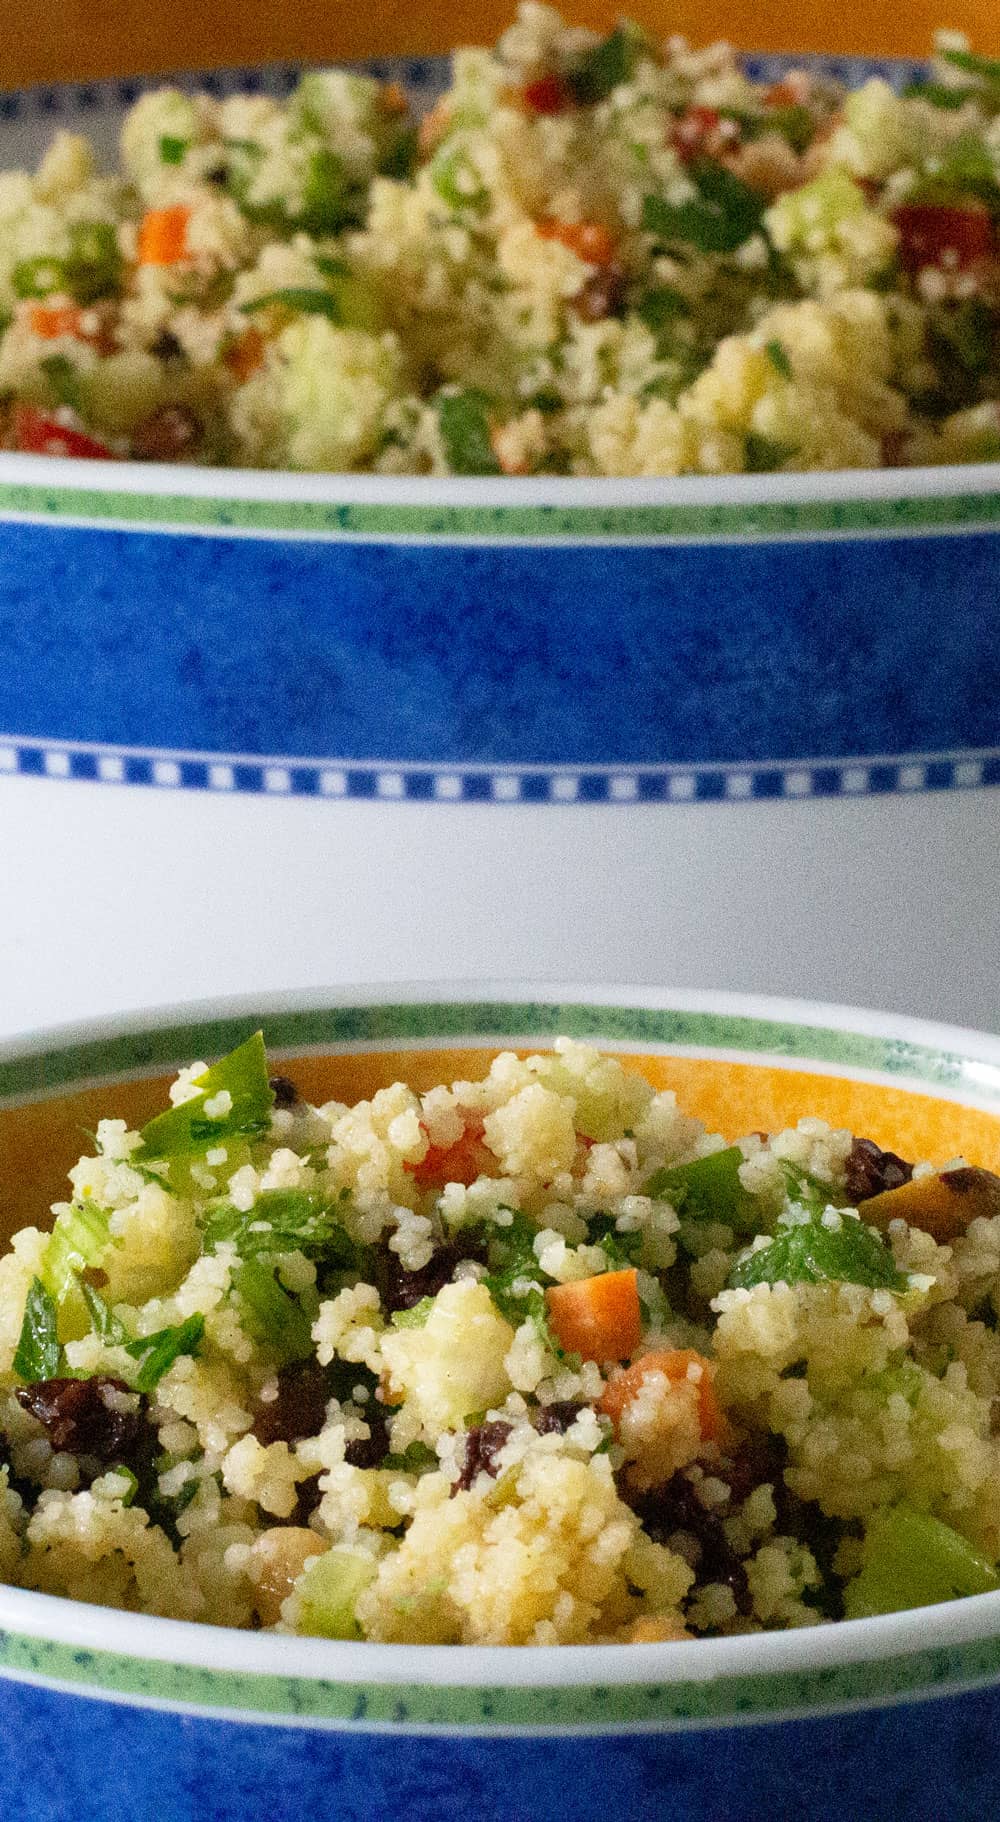 A small bowl of minty couscous salad in front of a larger bowl